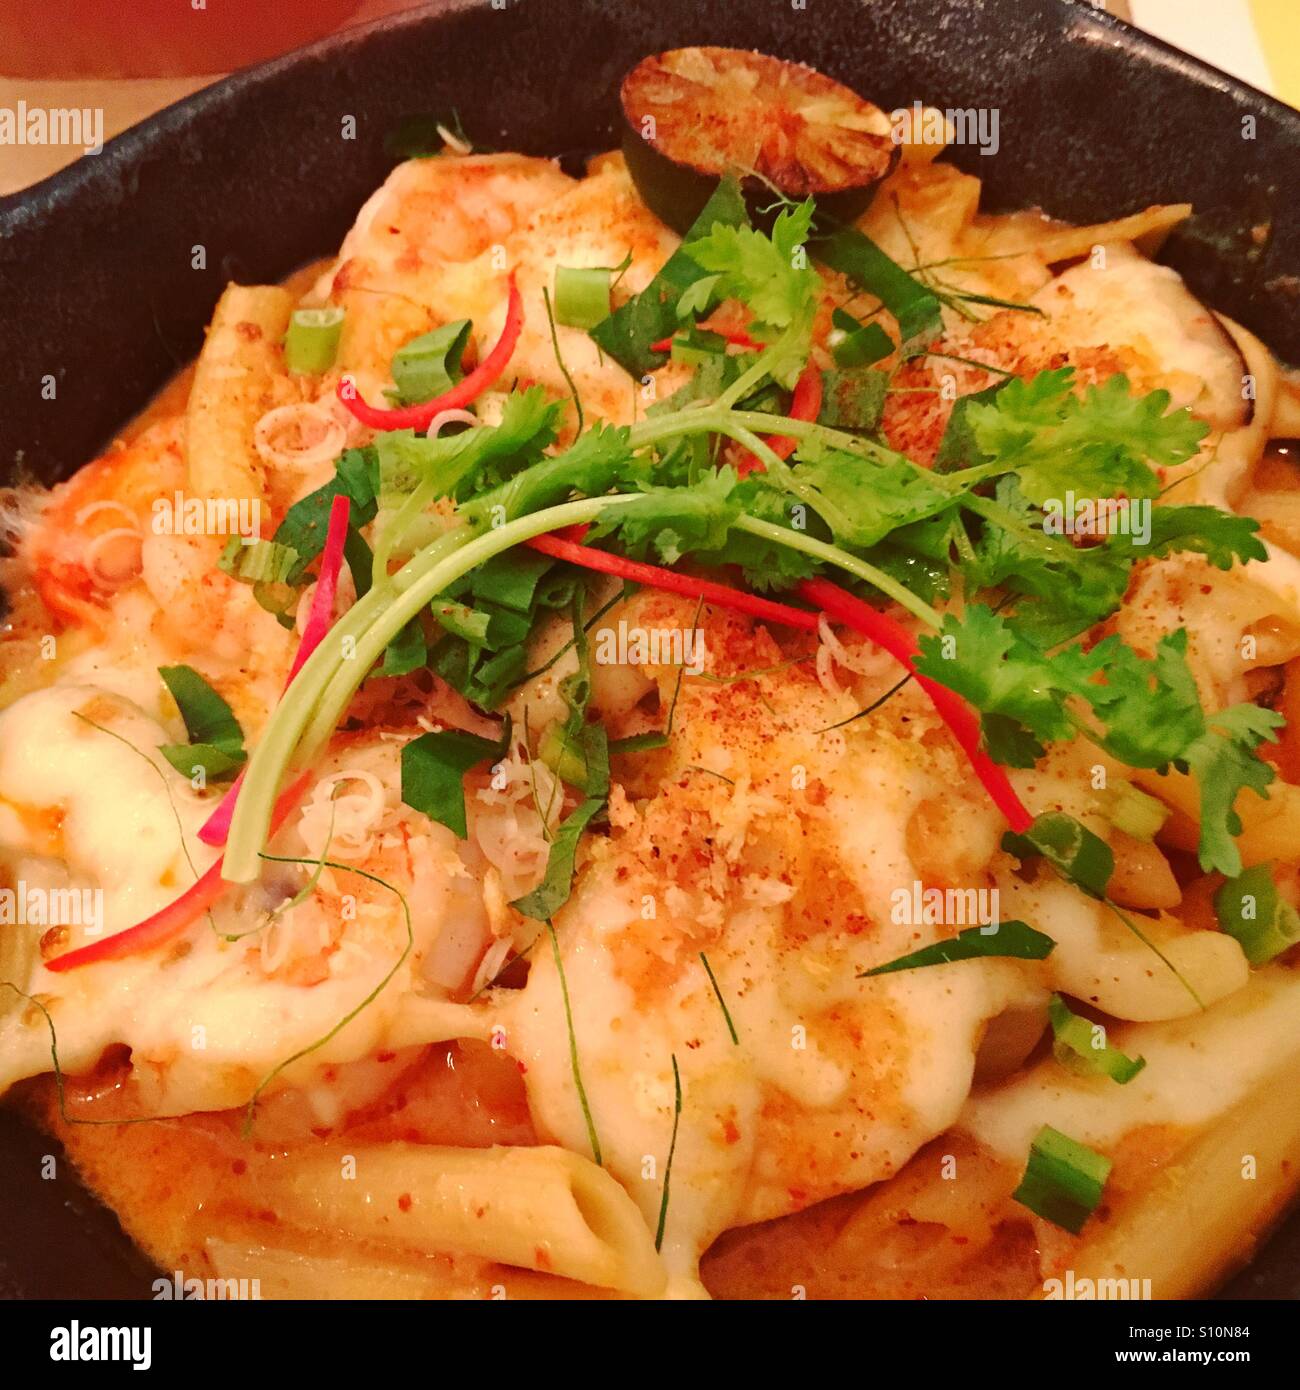 Tom Yum Kung Penne, spicy Thai fusion food Stock Photo